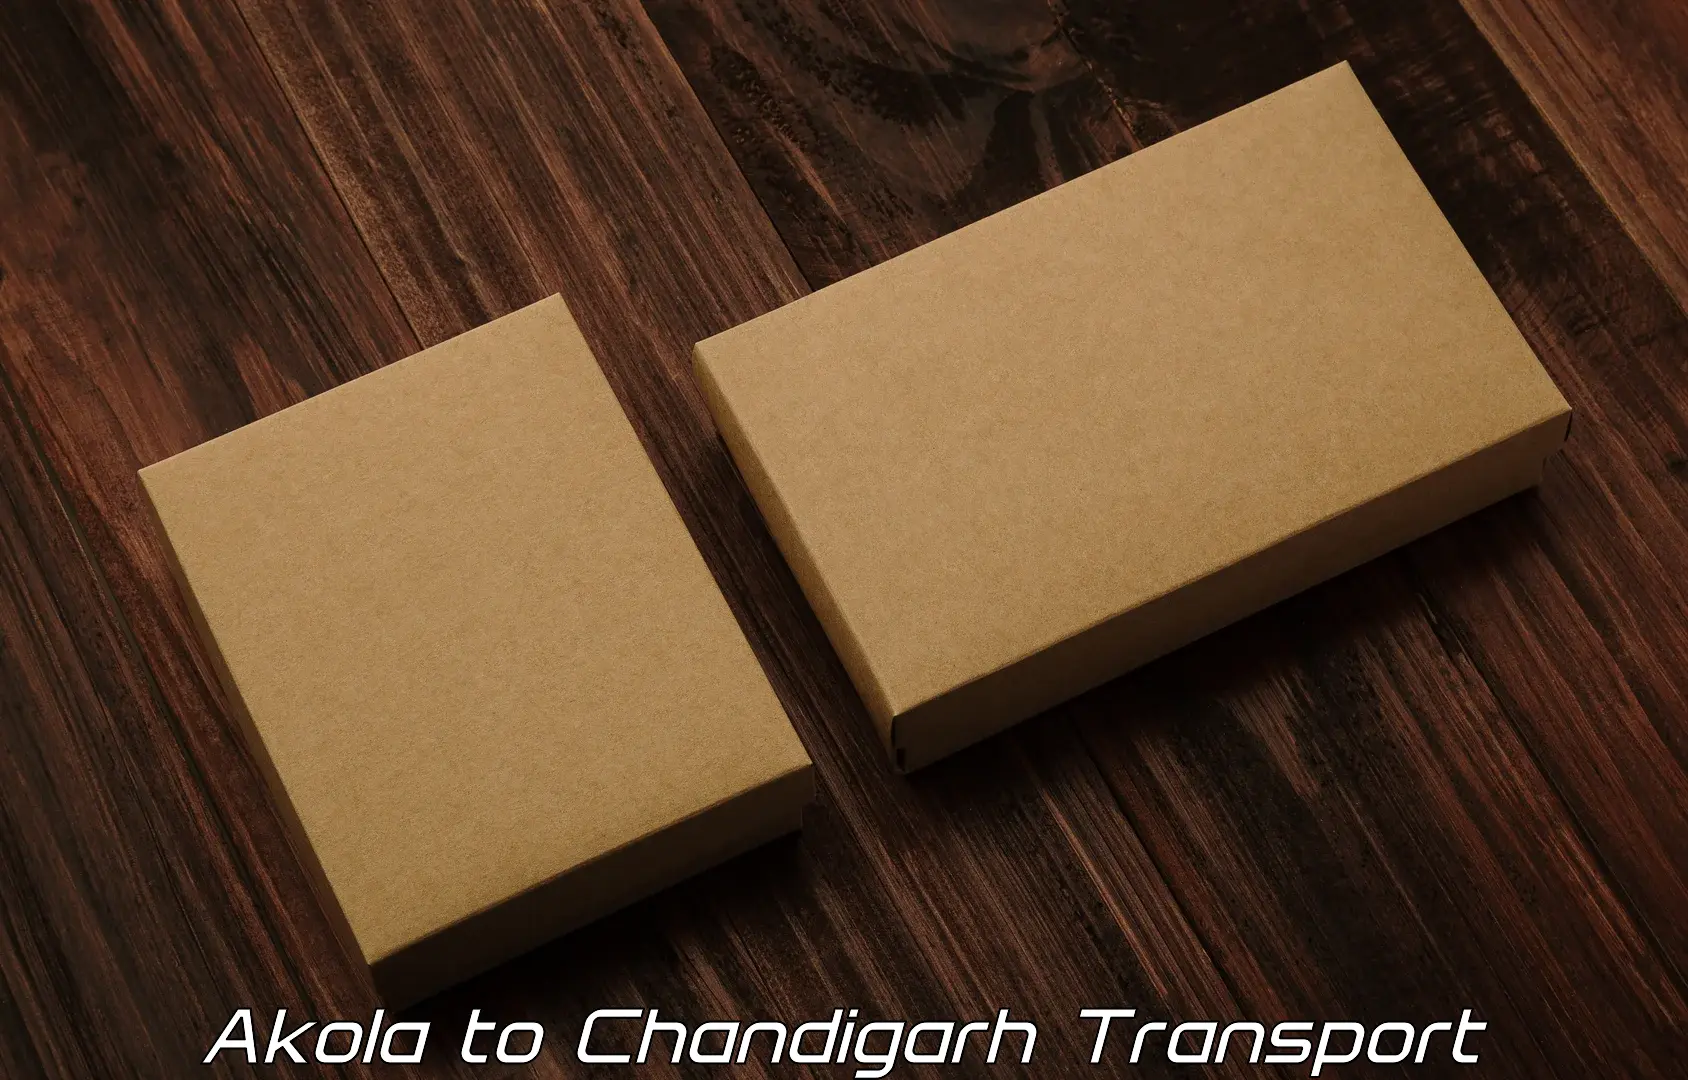 Delivery service Akola to Chandigarh